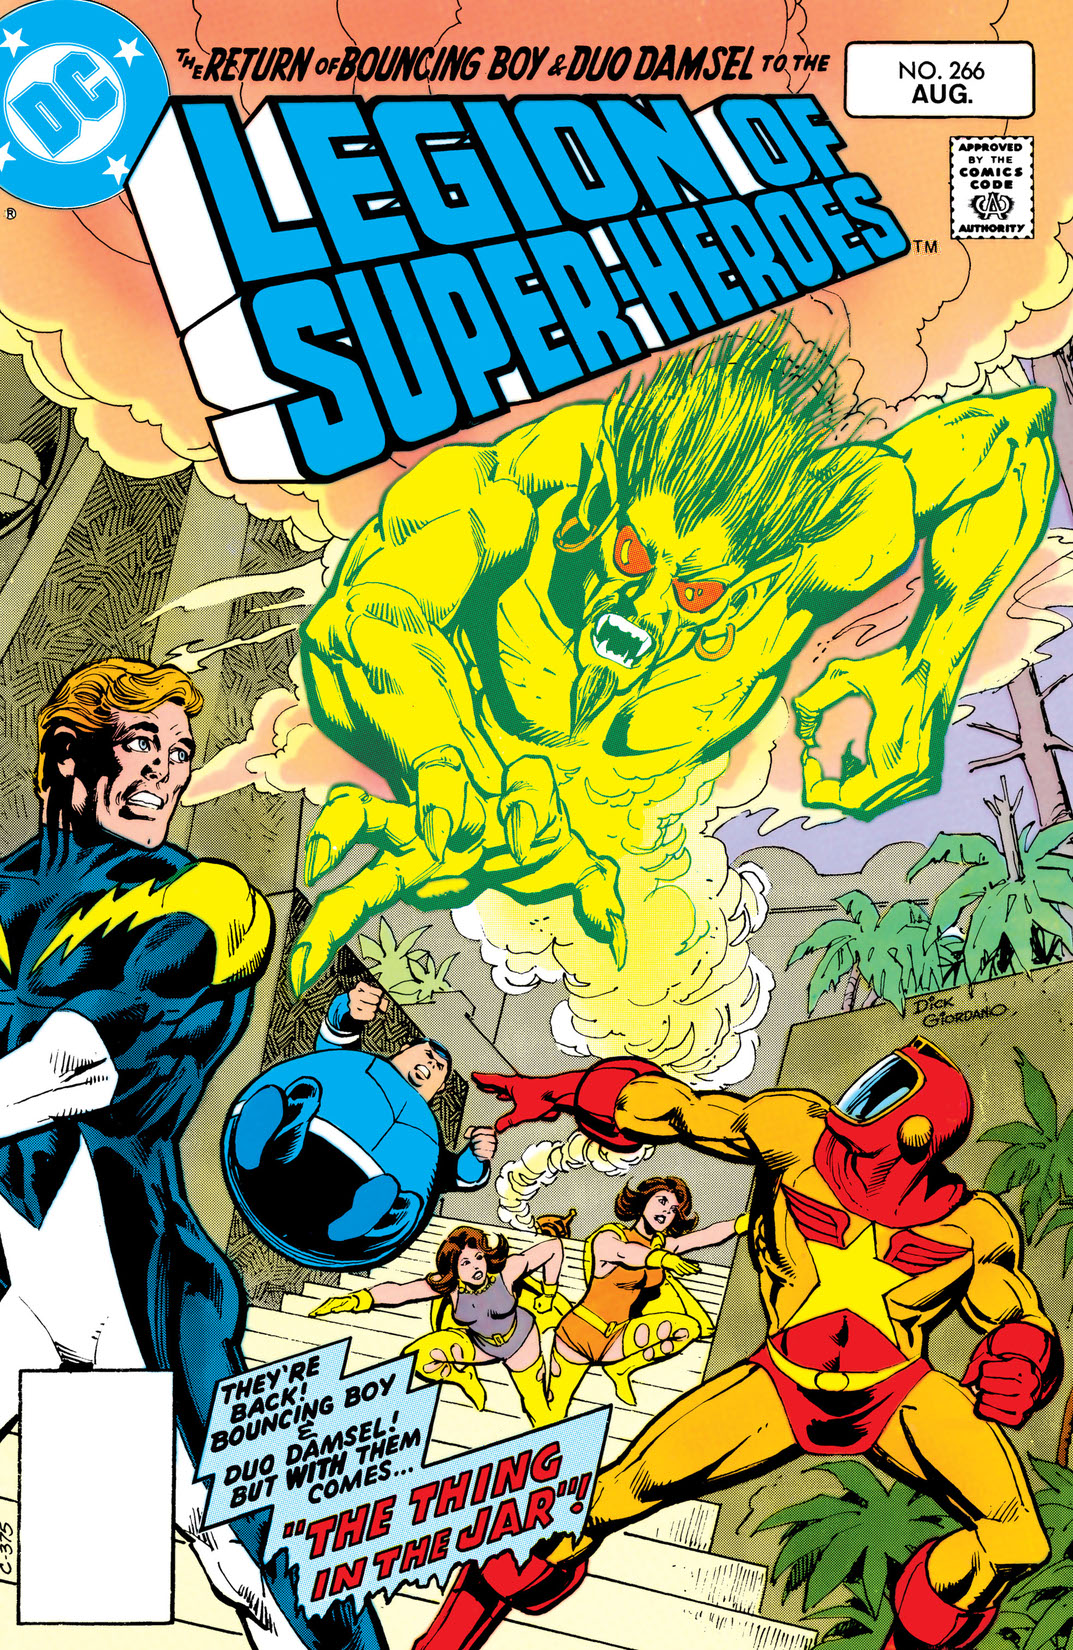 The Legion of Super-Heroes (1980-) #266 preview images